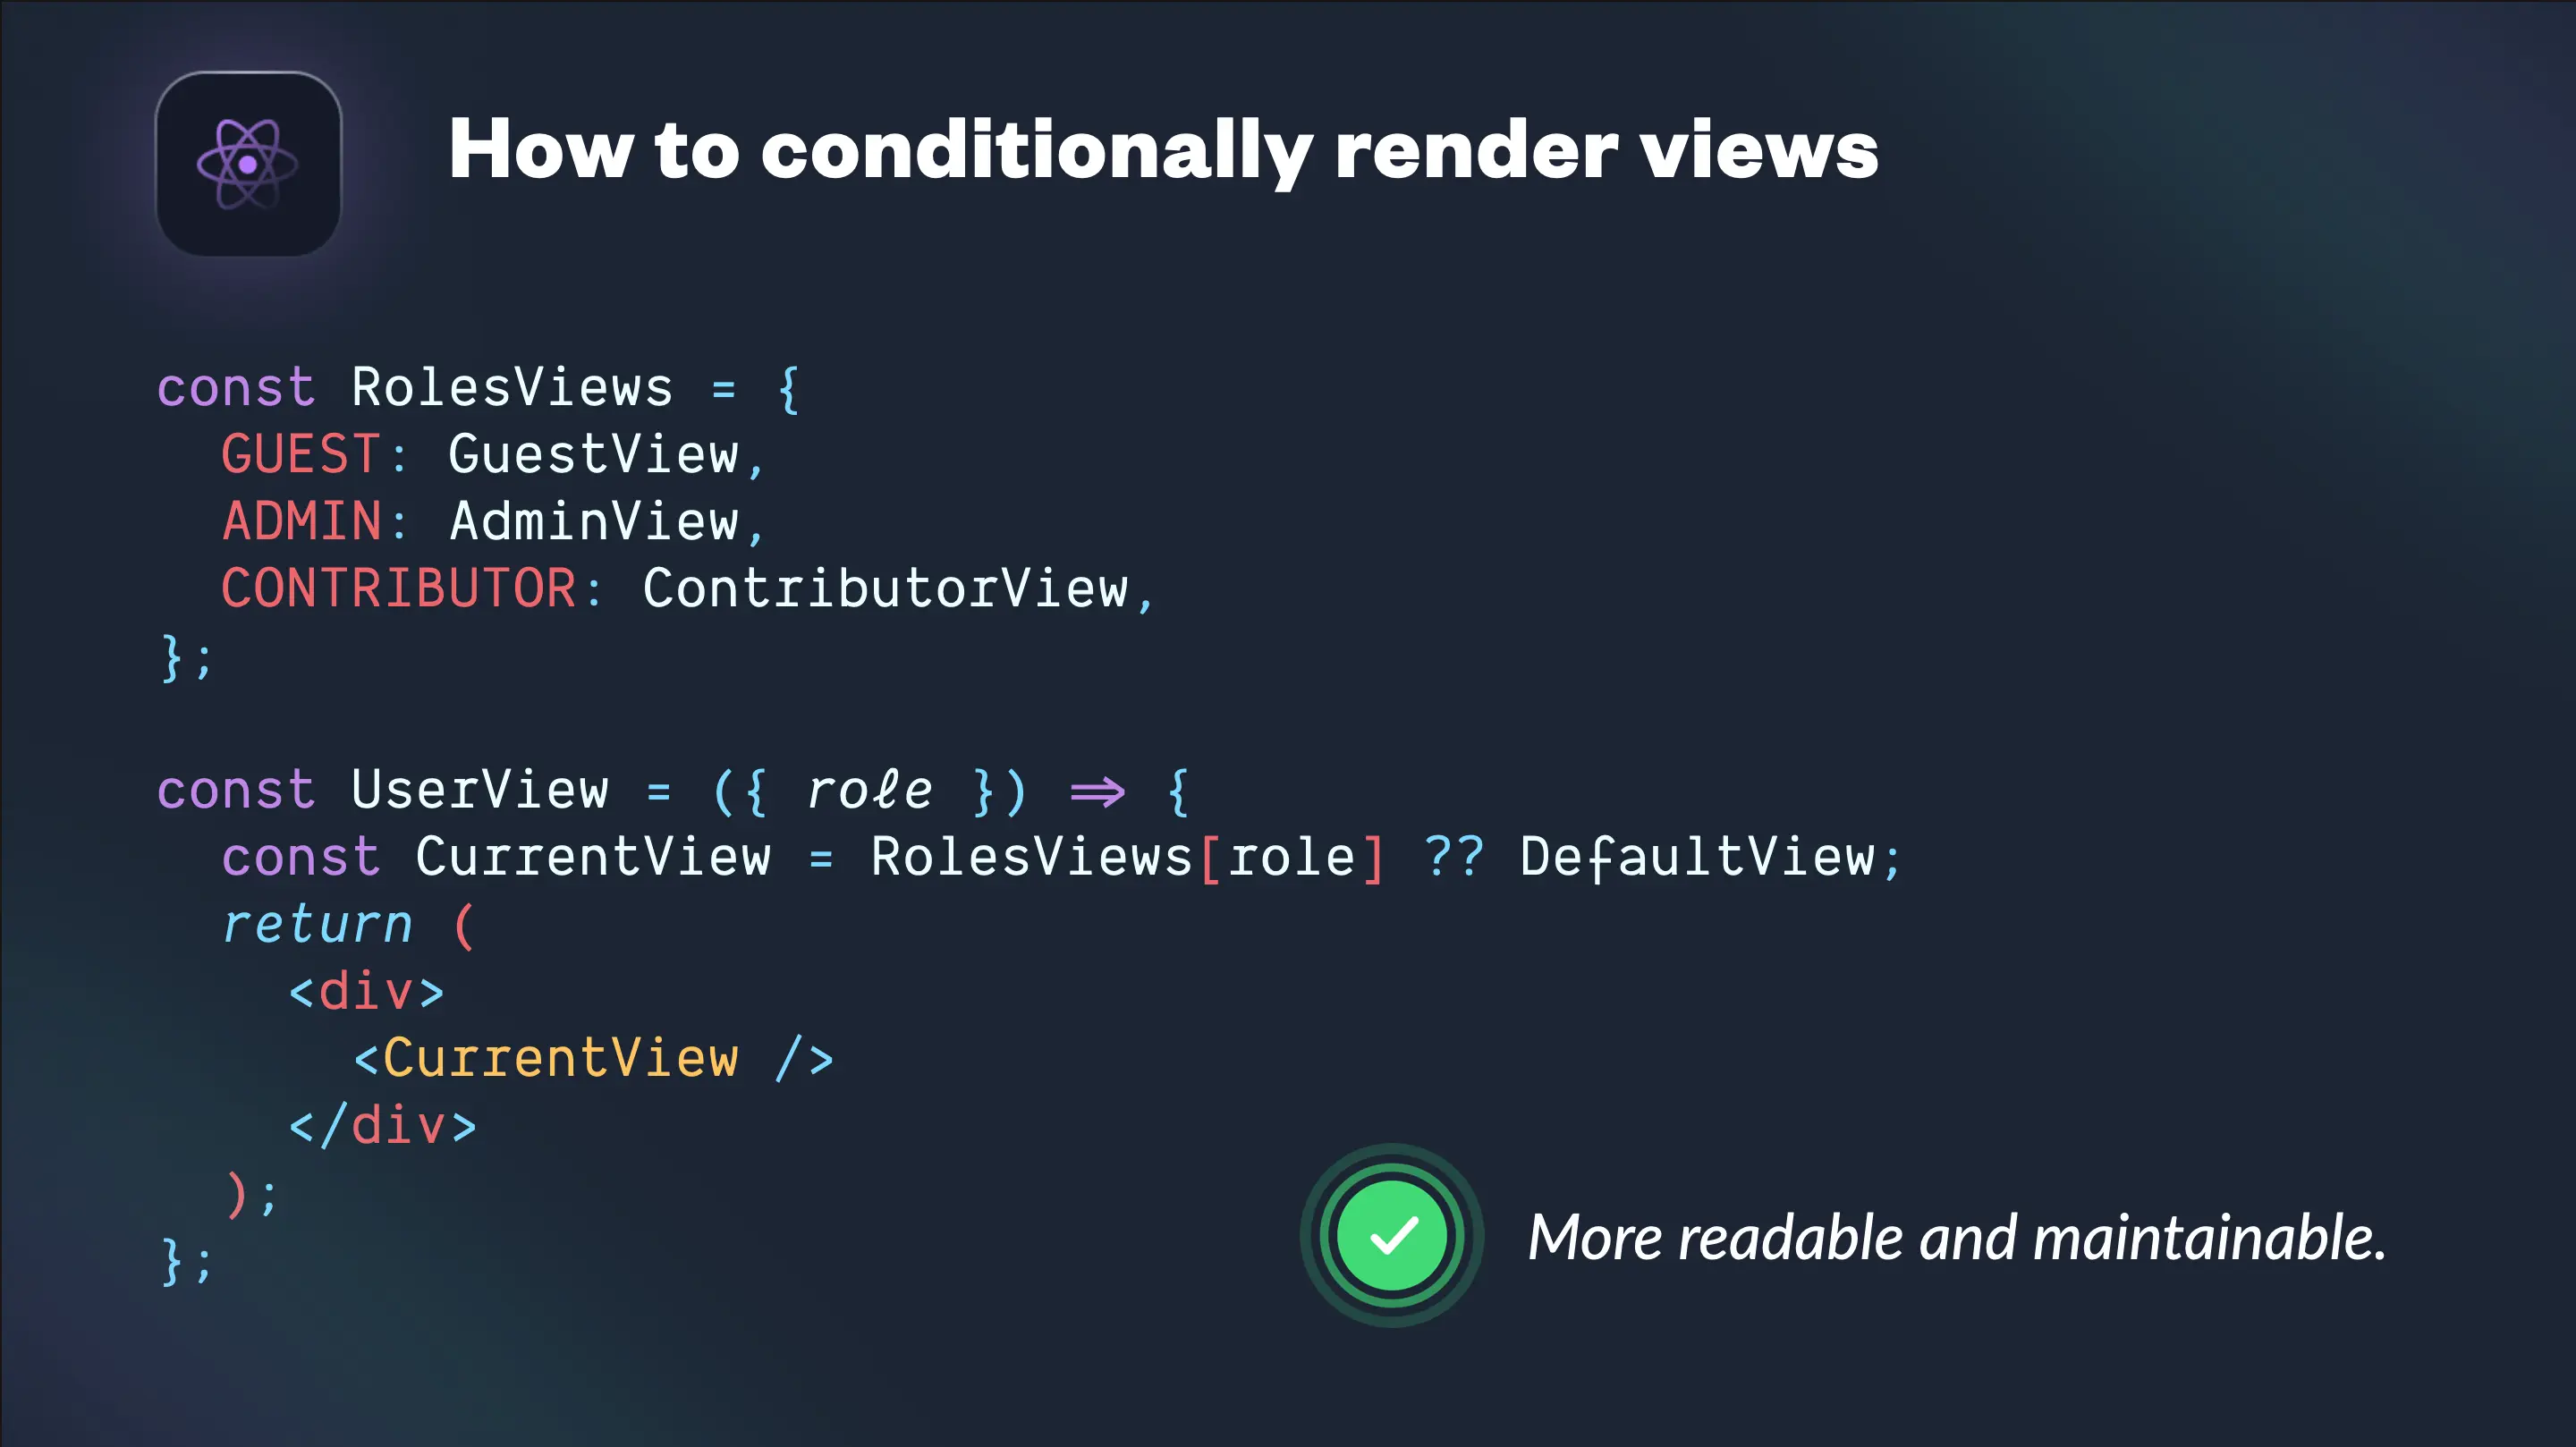 How to conditionally render views in React?